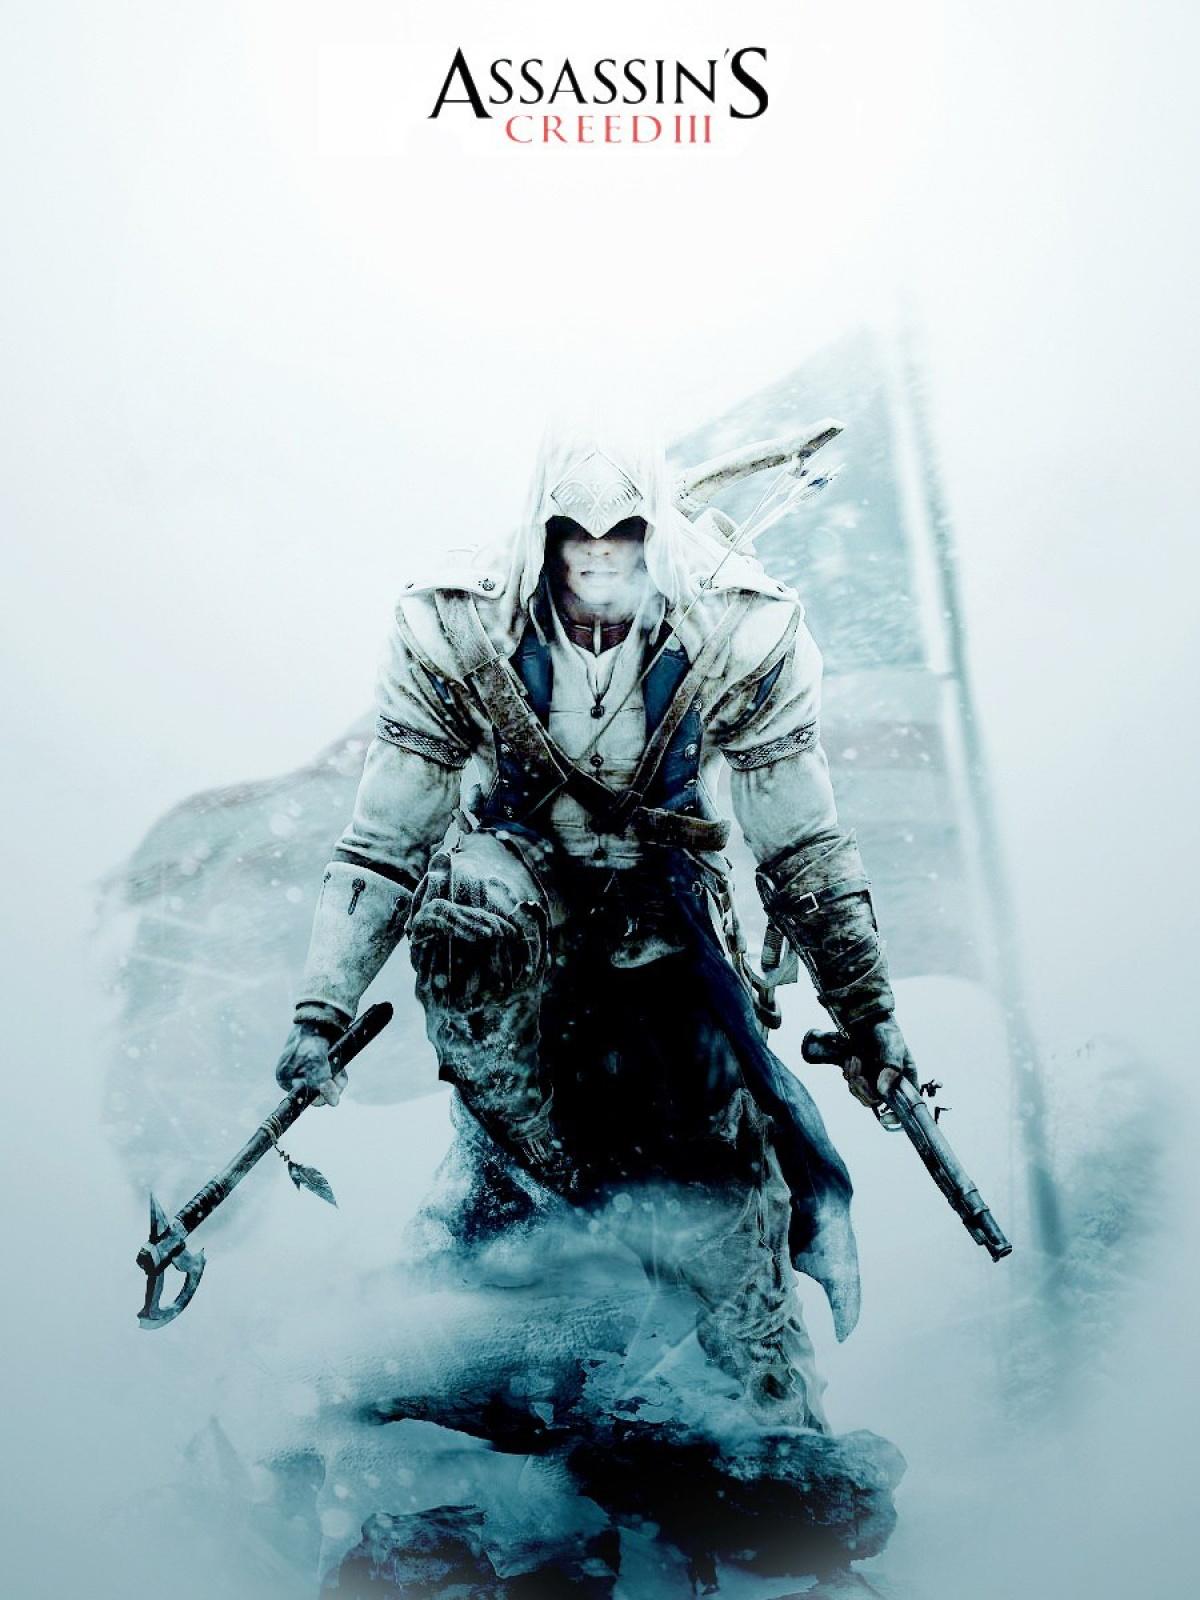 Assassins Creed 3 Remastered Review  CodeWithMike